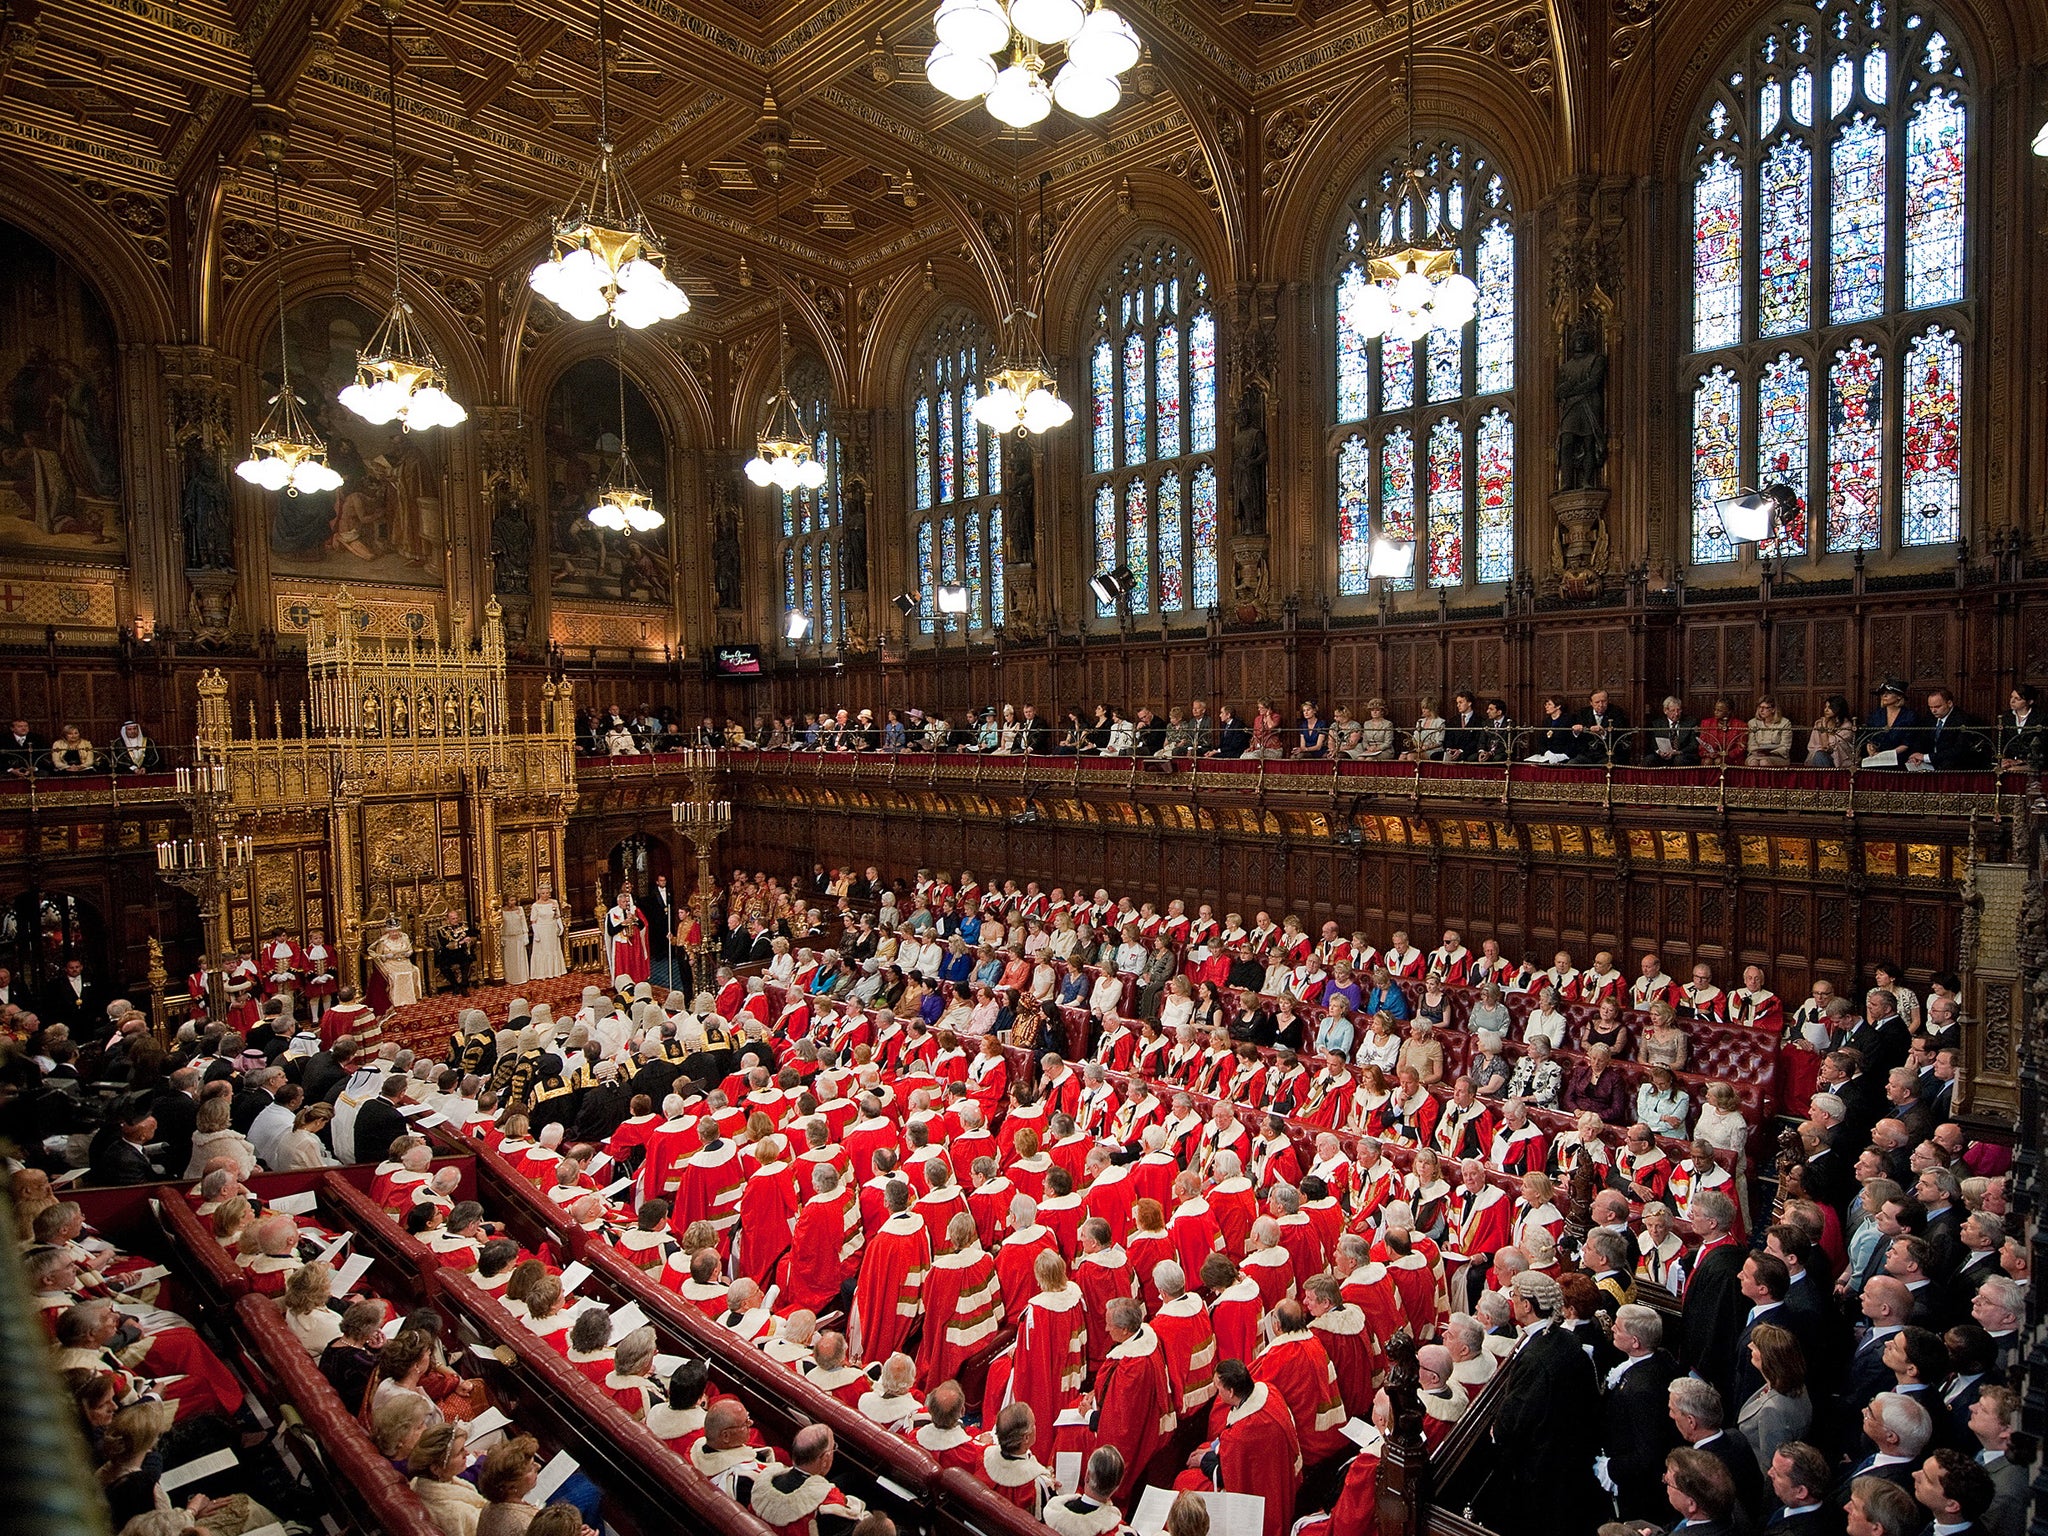 Like it or not, the House of Lords plays an important role Government